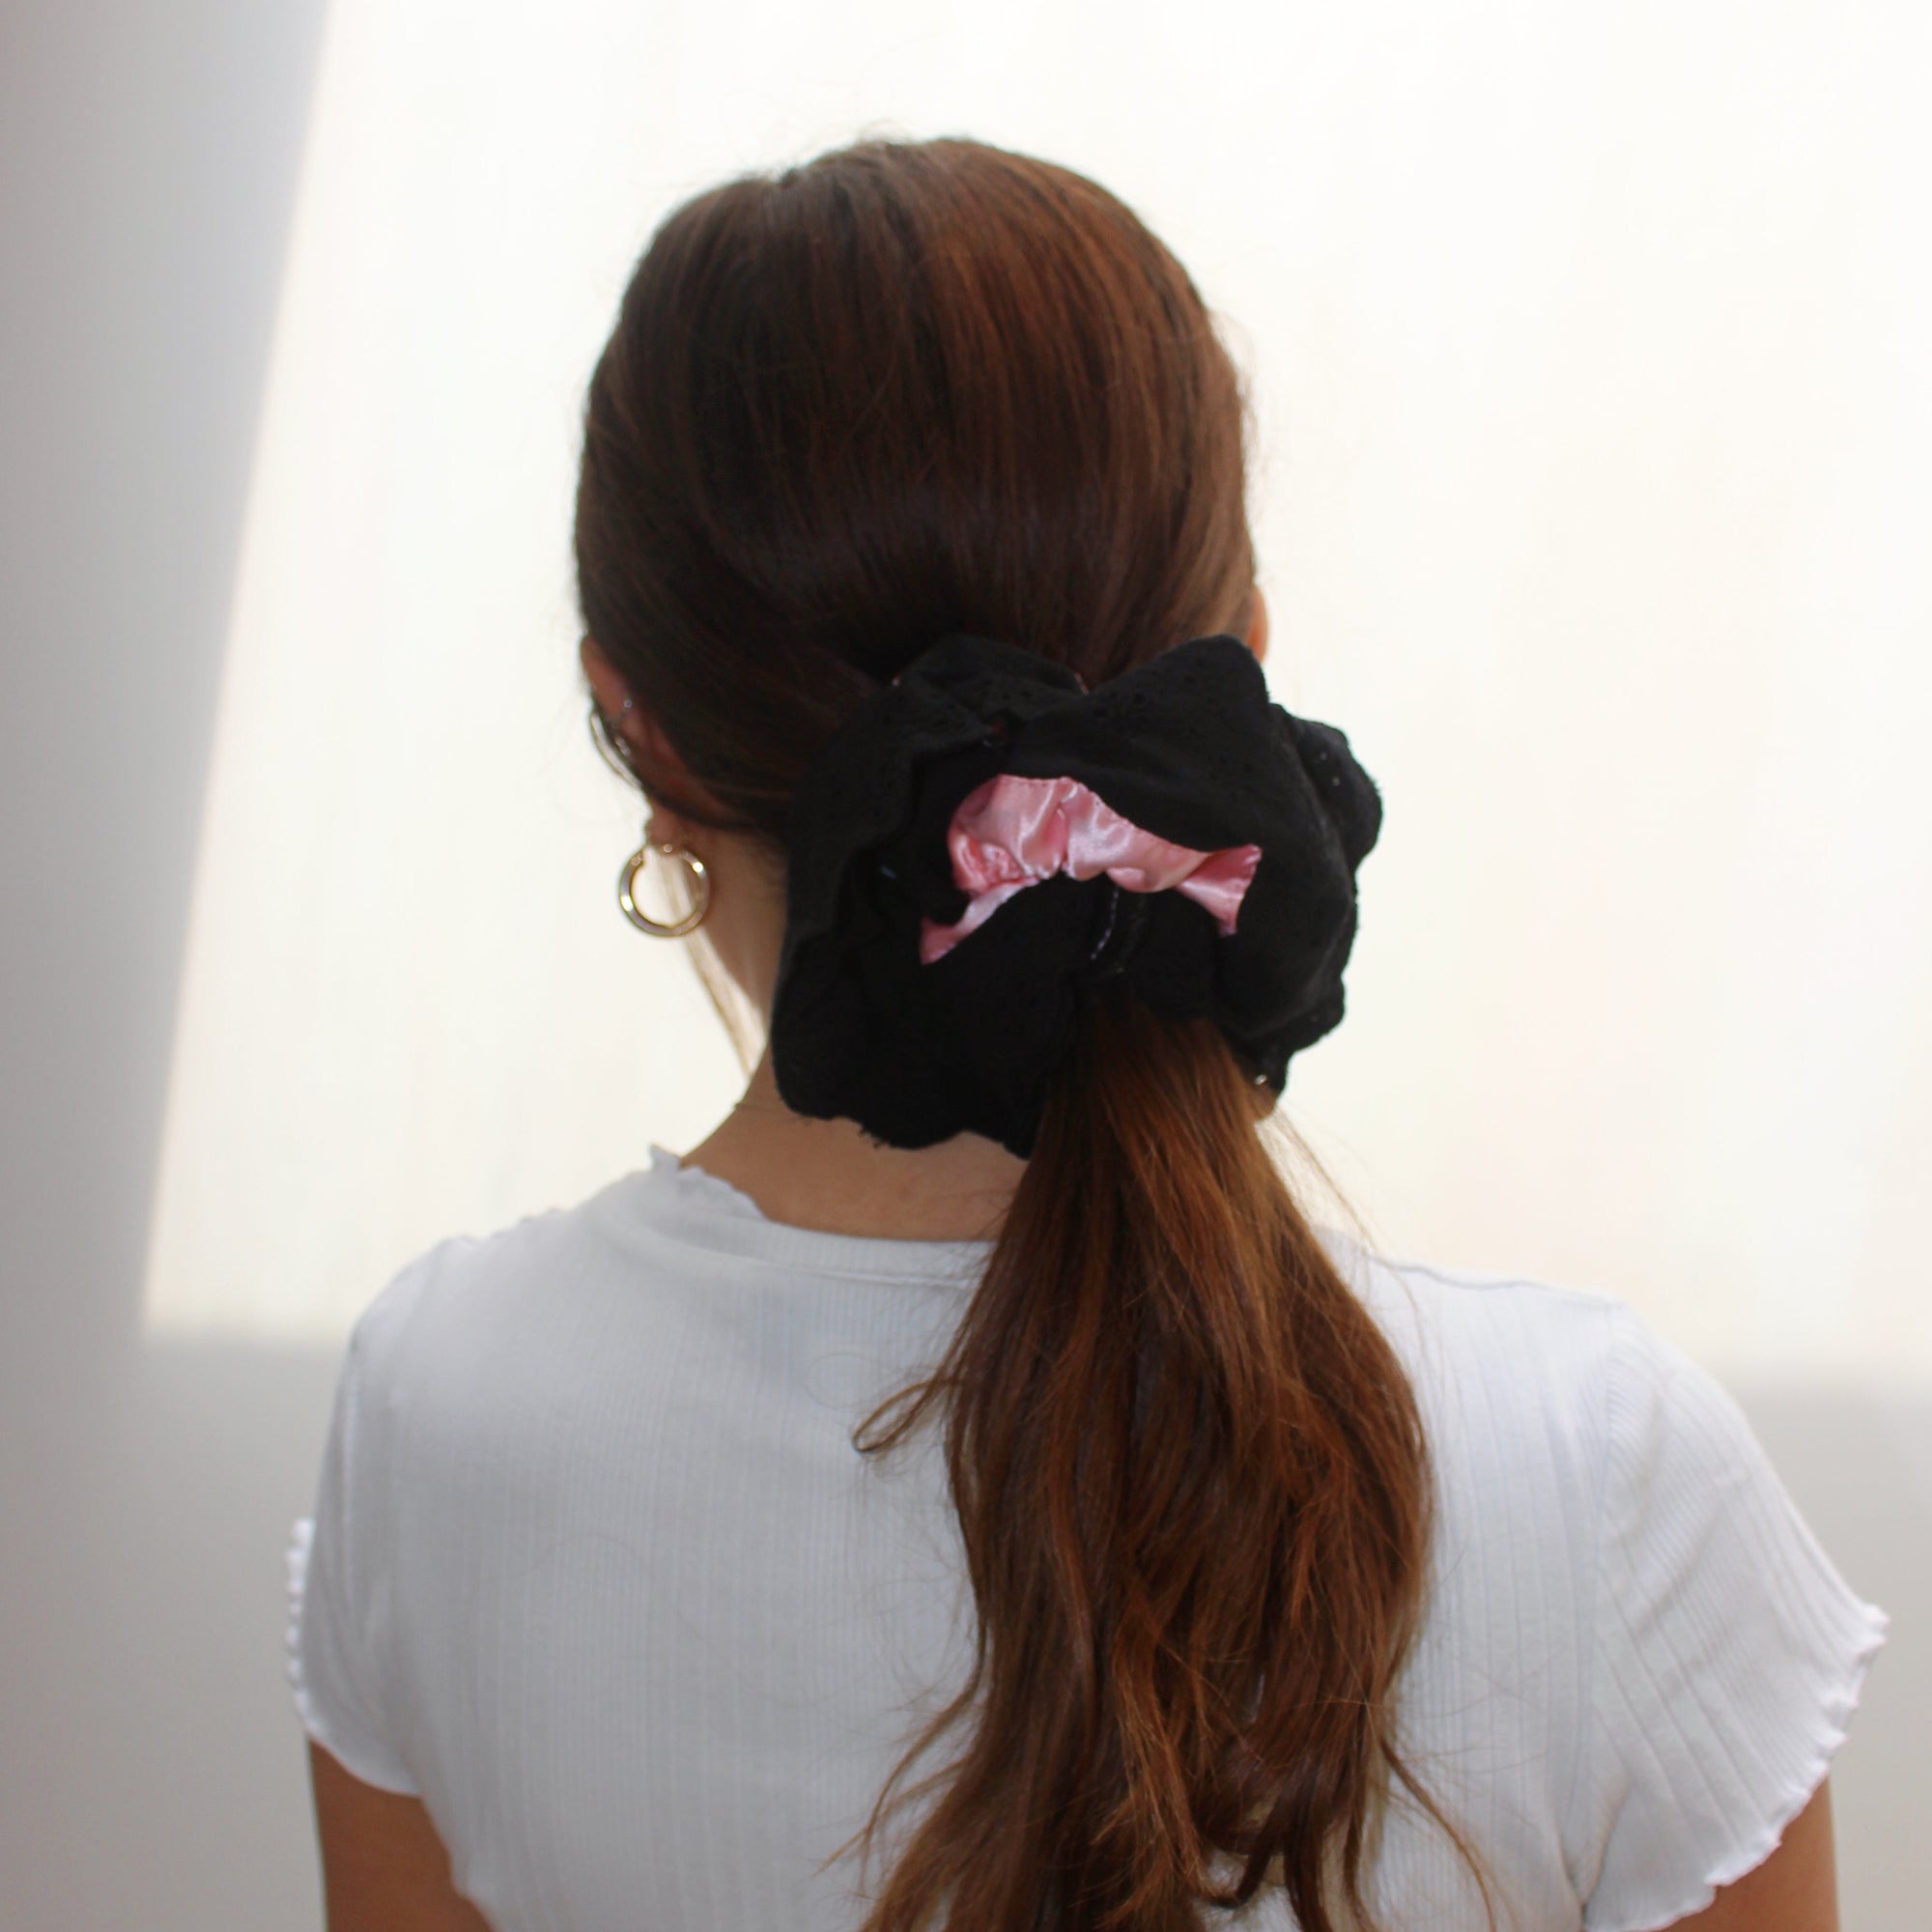 Meet LOLA!  A scrunchie big enough to hold all hair. Two layers of broderie anglaise makes it perfect for an all up look on both fine and thicker hair, or great for securing a bun. The silky centre is kinder to the hair, especially if being worn overnight.  Each scrunchie comes with a pink ribbon tag on which can be used as a gift tag.  Size: approx 18cm  Colour: black lace with a blush pink silk centre  Material: Cotton and Satin